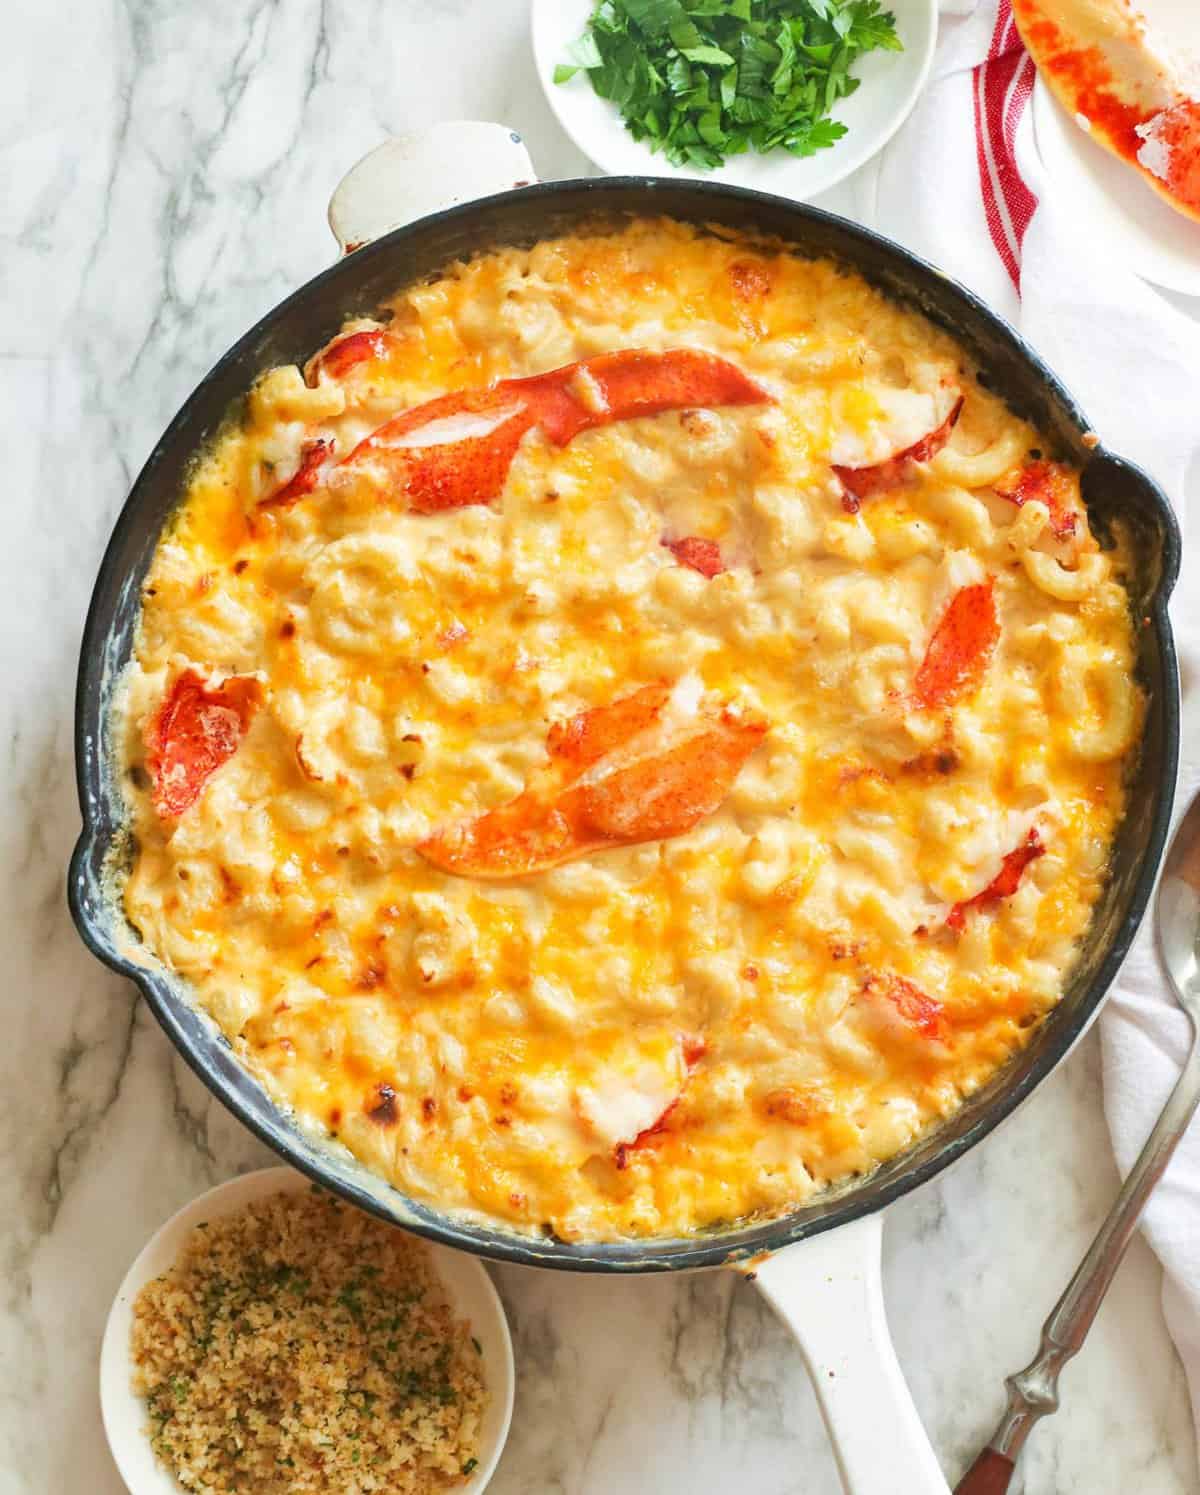 Lobster Mac and Cheese for a decadently special meal